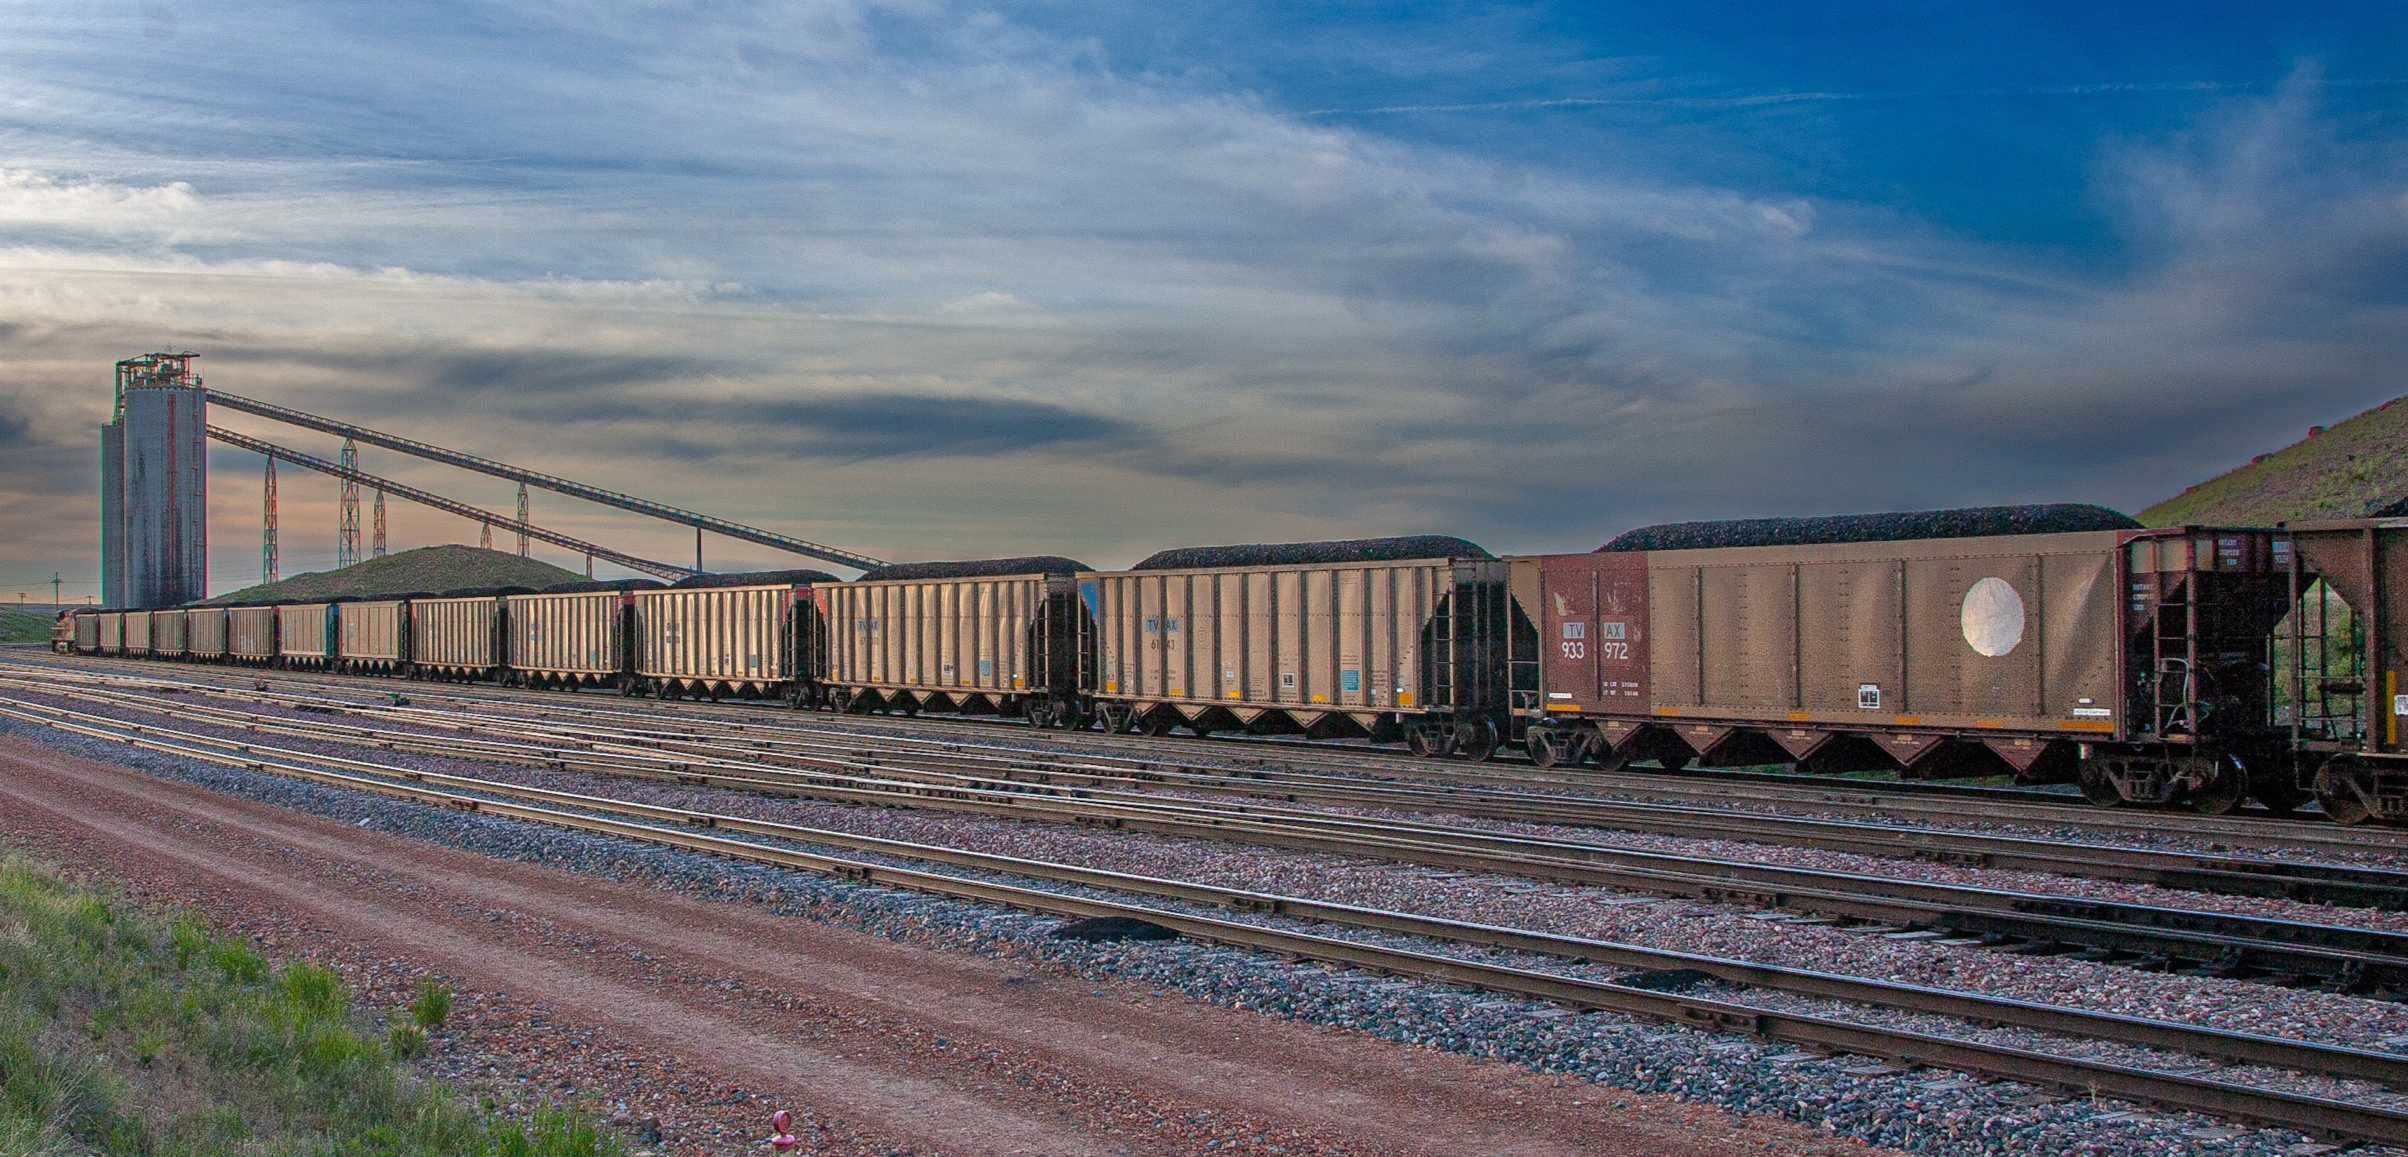 STB Grants Preliminary Injunction; Orders BNSF Railway Company to Transport 4.2 Million Tons of Coal for Navajo Transitional Energy Company, LLC